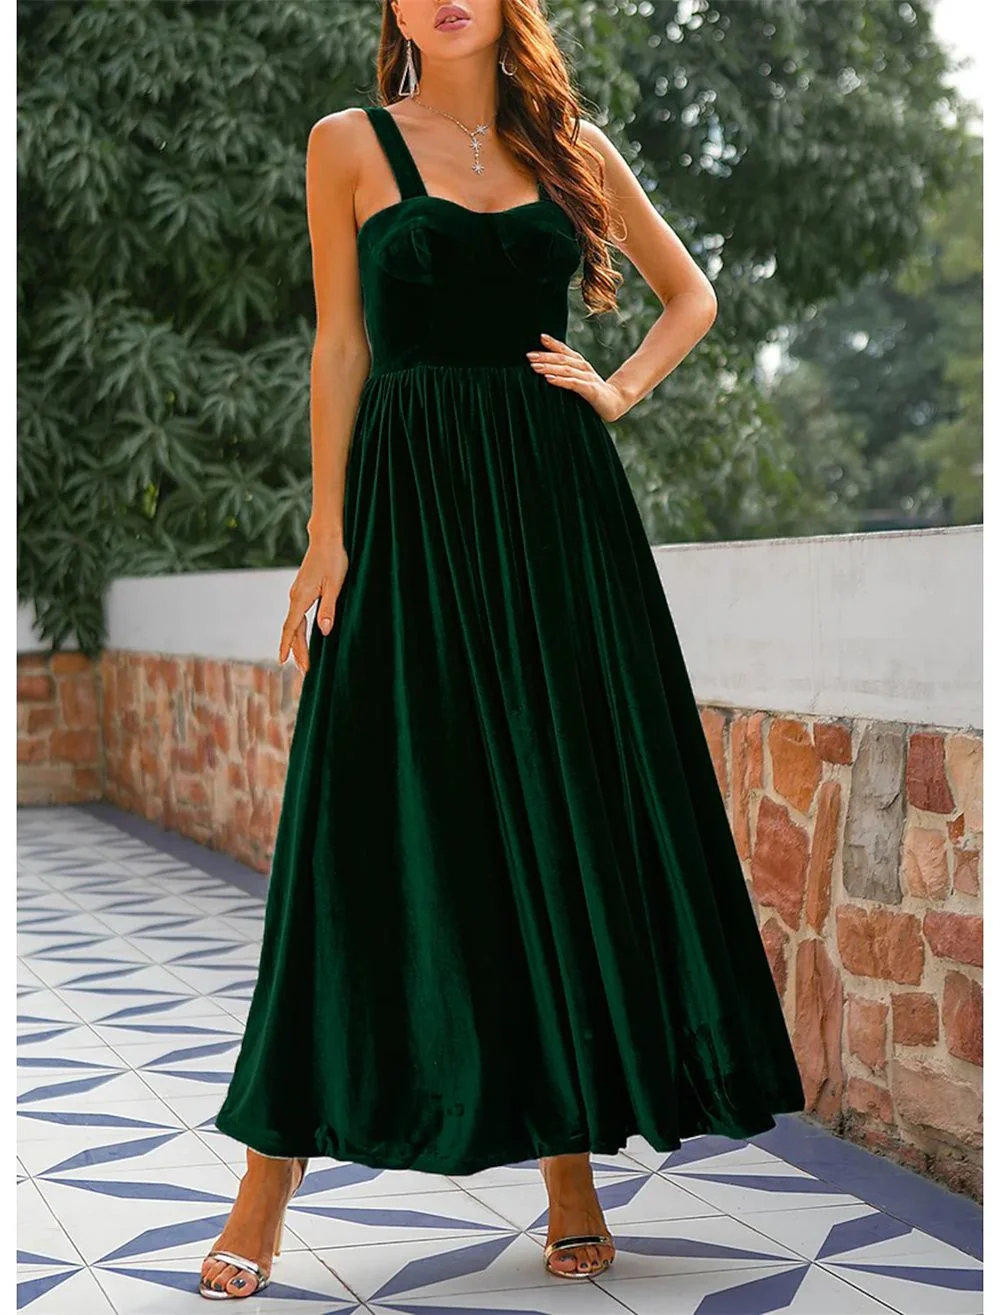 

A-Line Minimalist Sexy Homecoming Cocktail Party Dress Spaghetti Strap Sleeveless Ankle Length Velvet with Sleek Pure Color